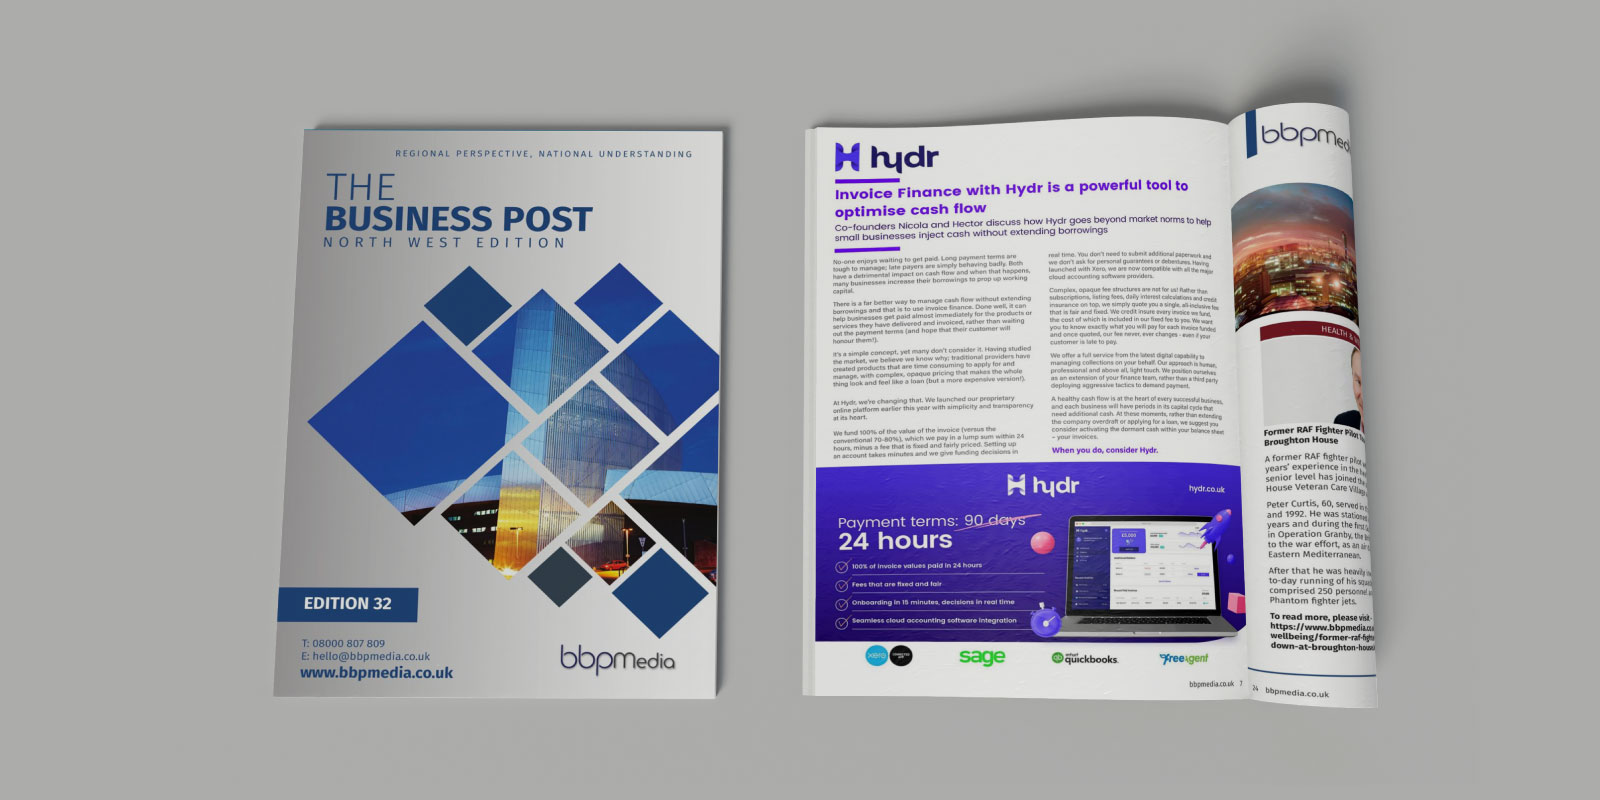 Hydr - Invoice Finance Provider - Featured in BBP Media North West Article